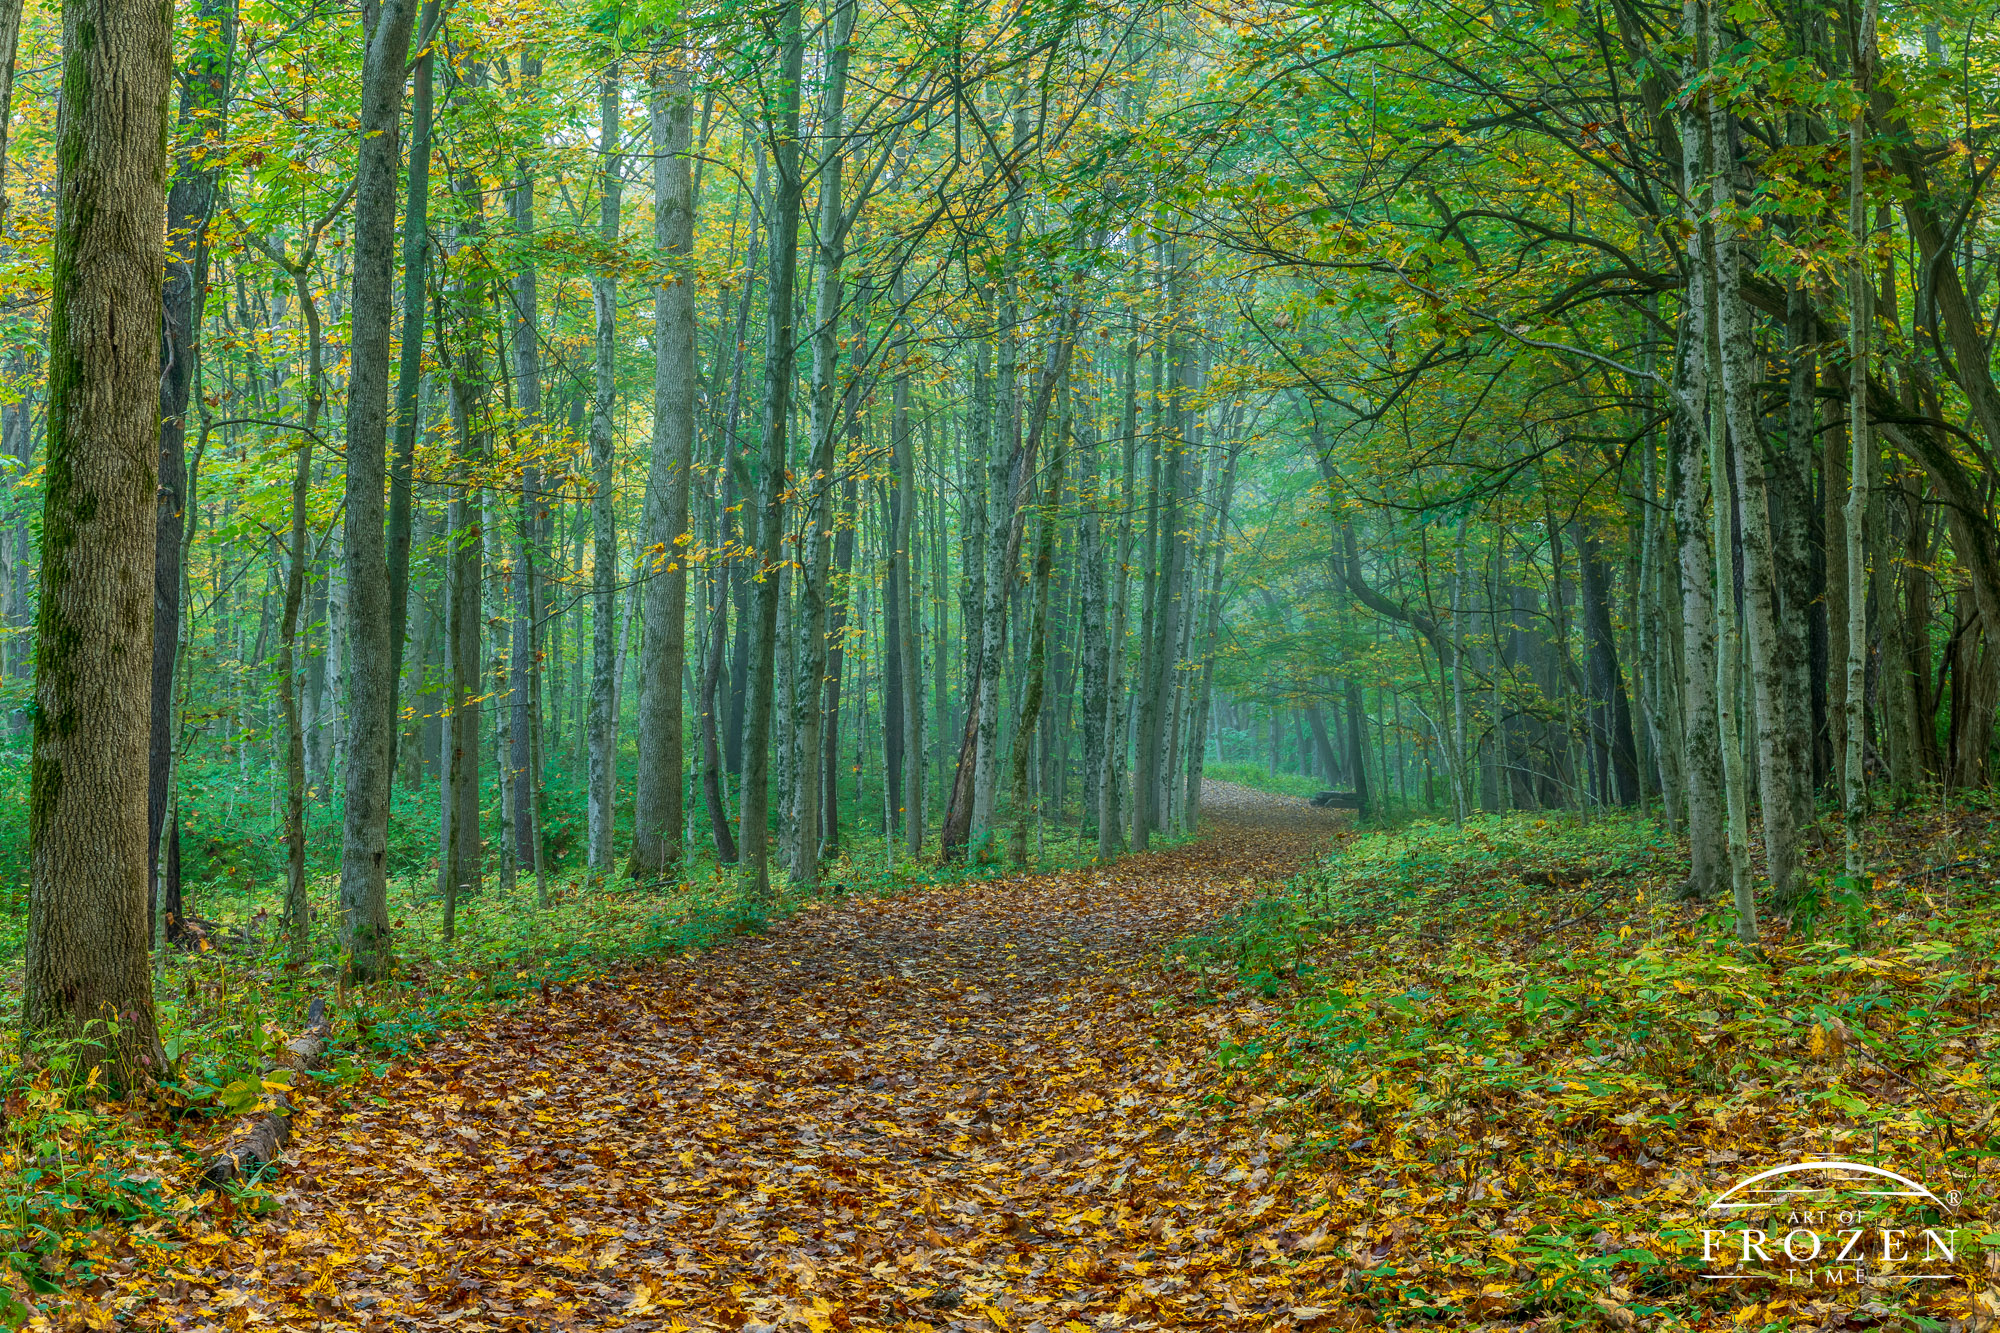 A meandering path through a stand of beech trees on a foggy autumn morning